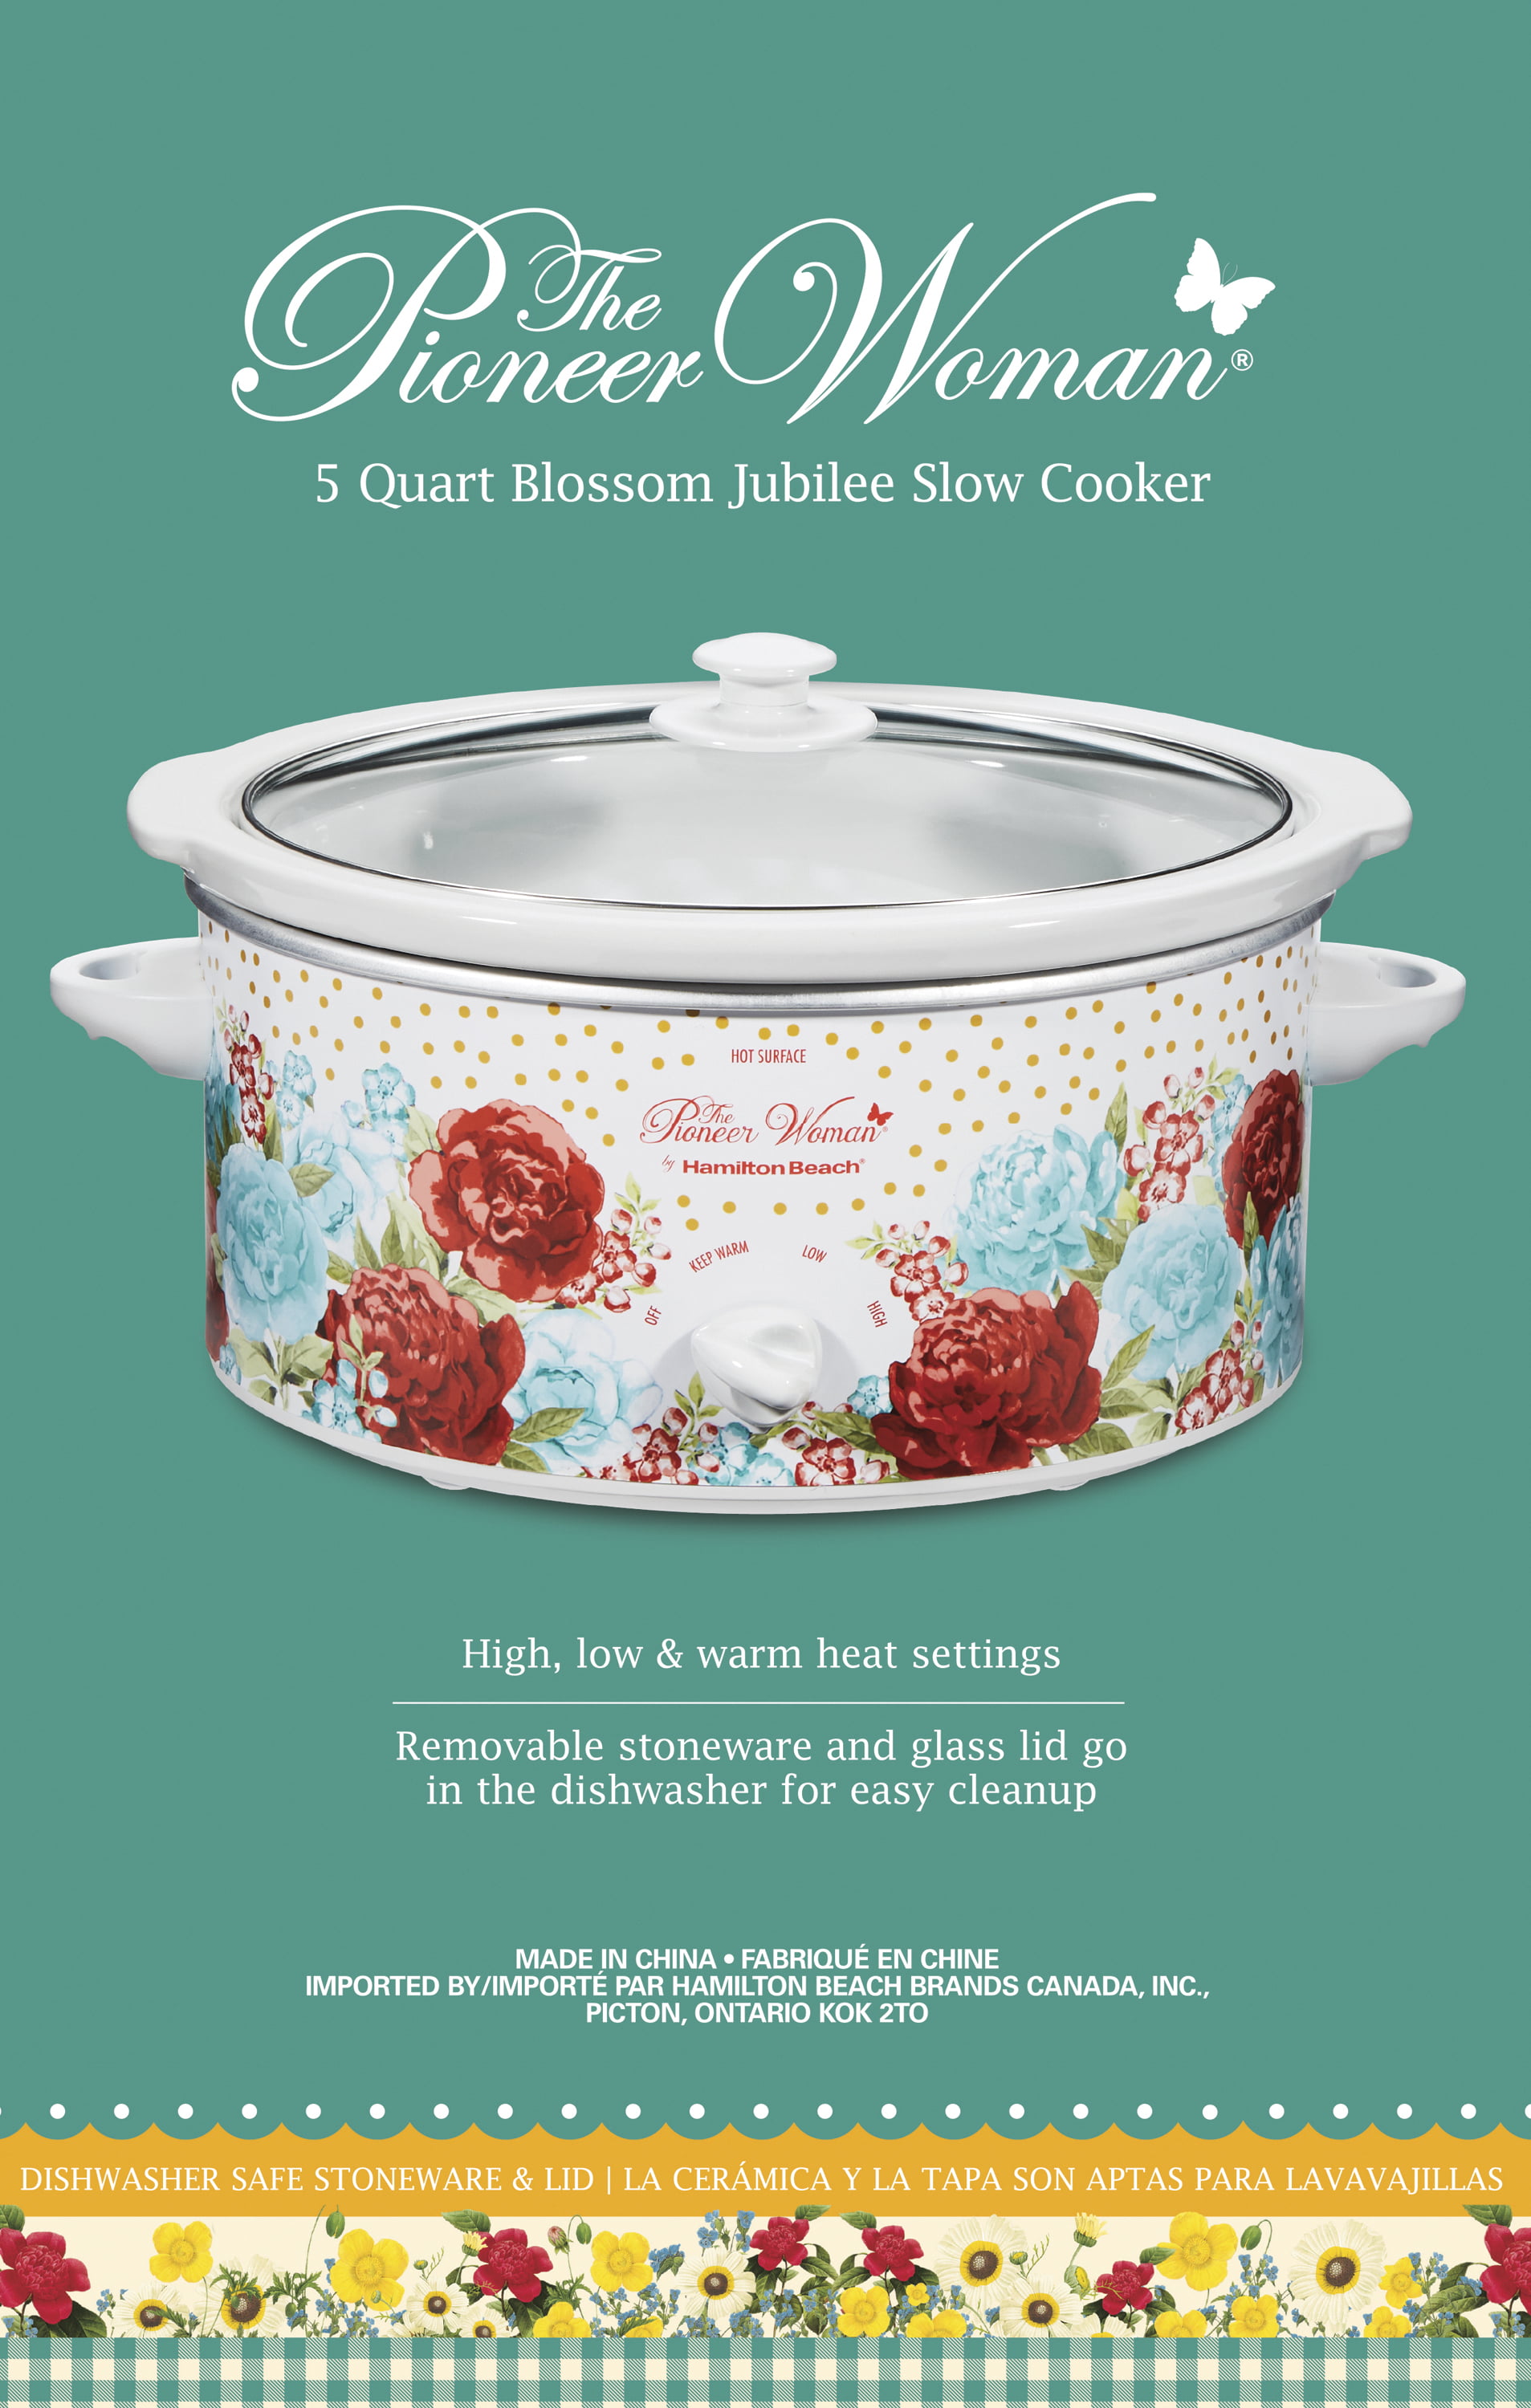  The Bake Shop Pioneer Woman Small 1.5 Quart Slow Cooker 2 Pack  Set Sweet Romance Floral and Gingham, multi: Home & Kitchen